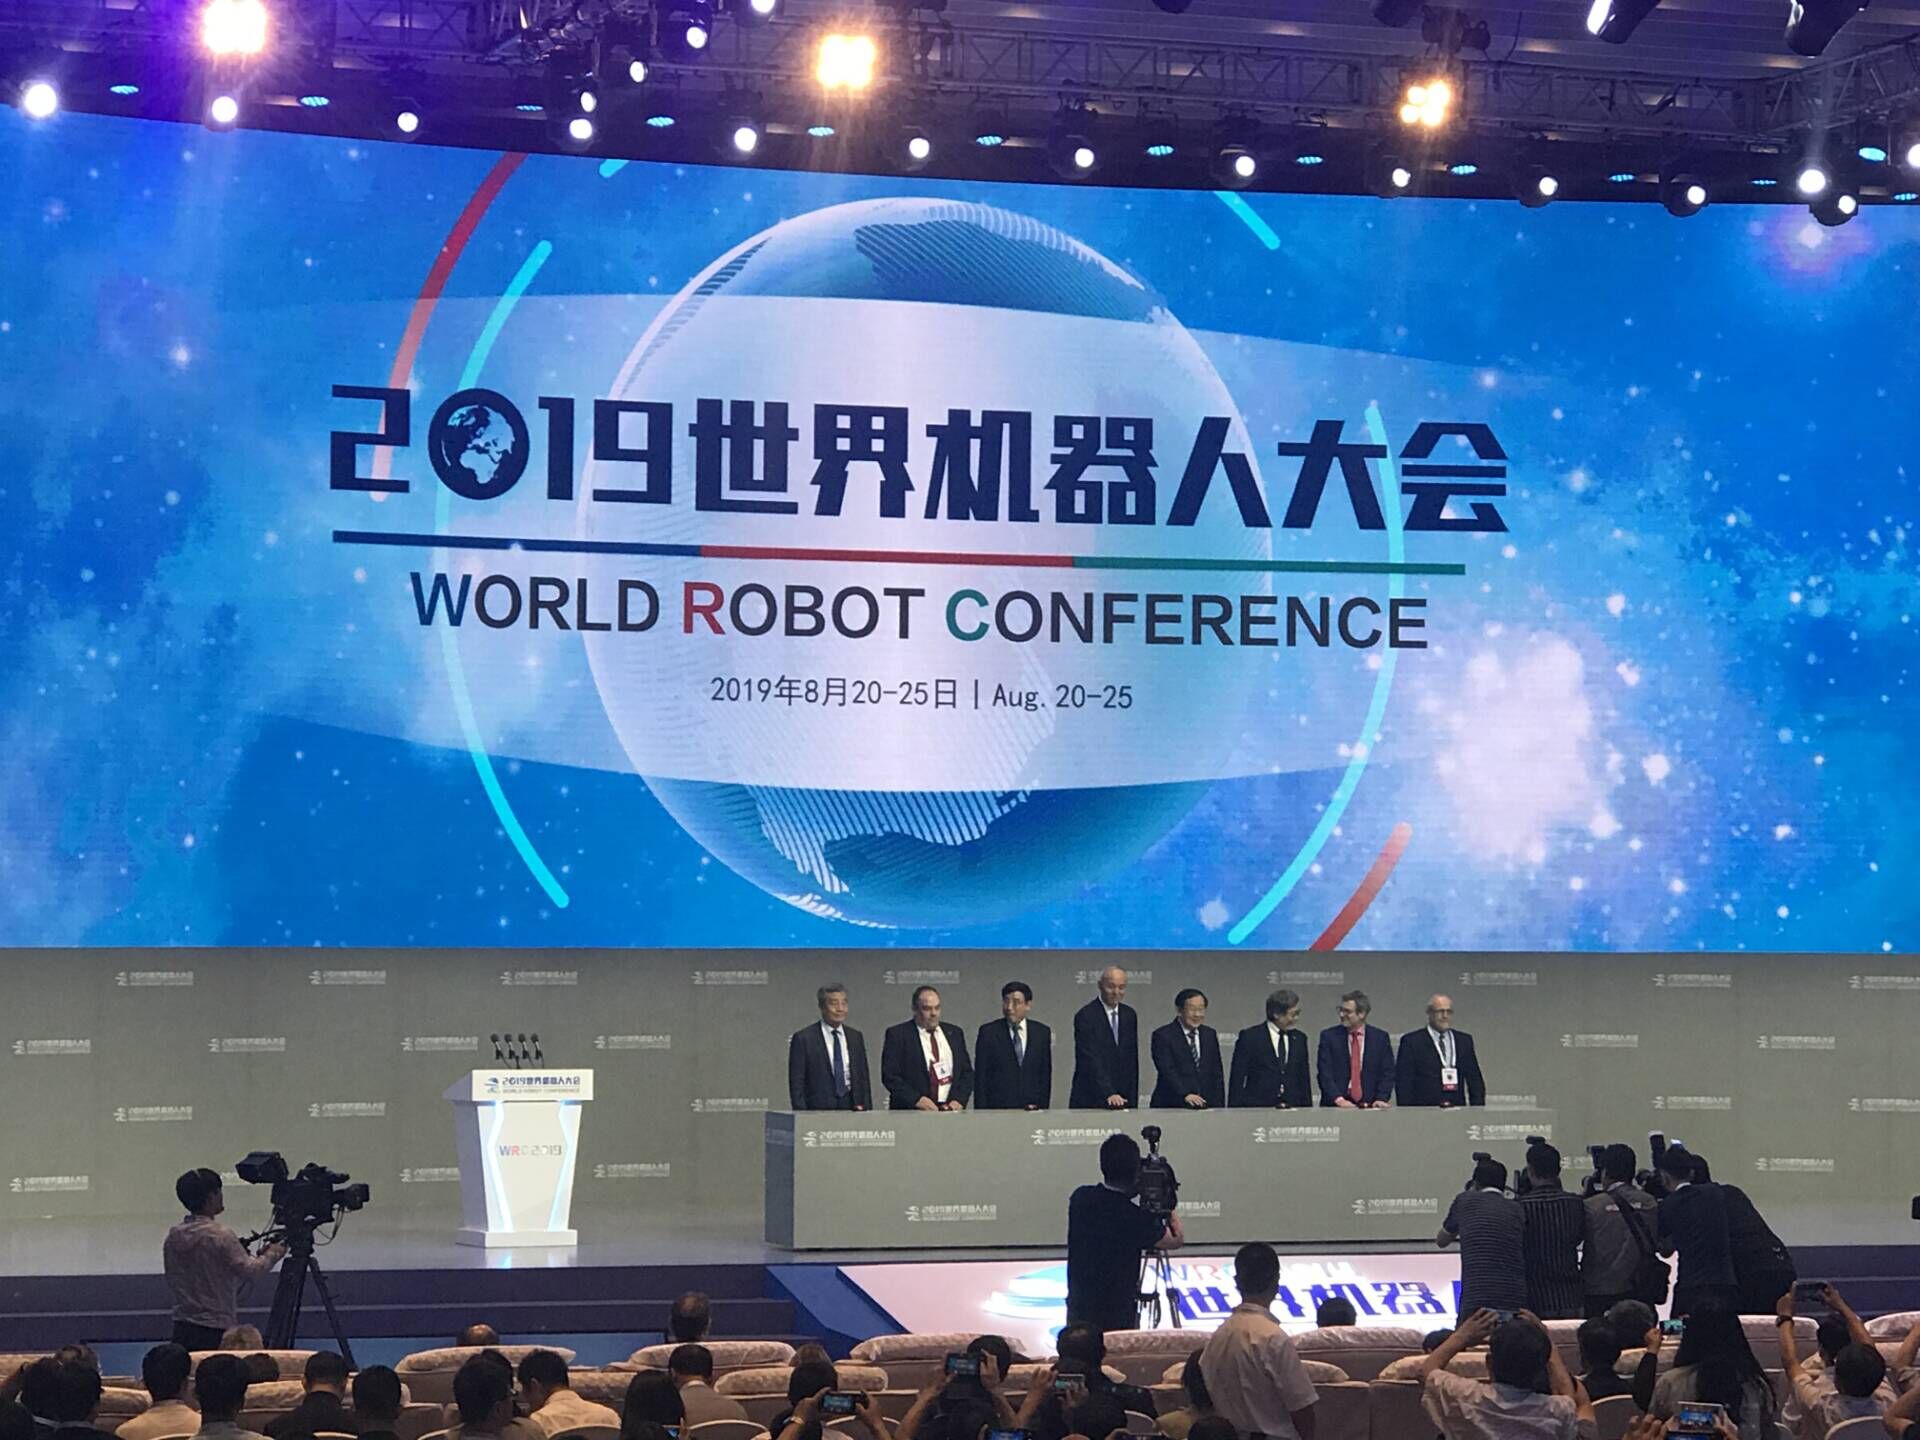 World Robot Conference opens in Beijing